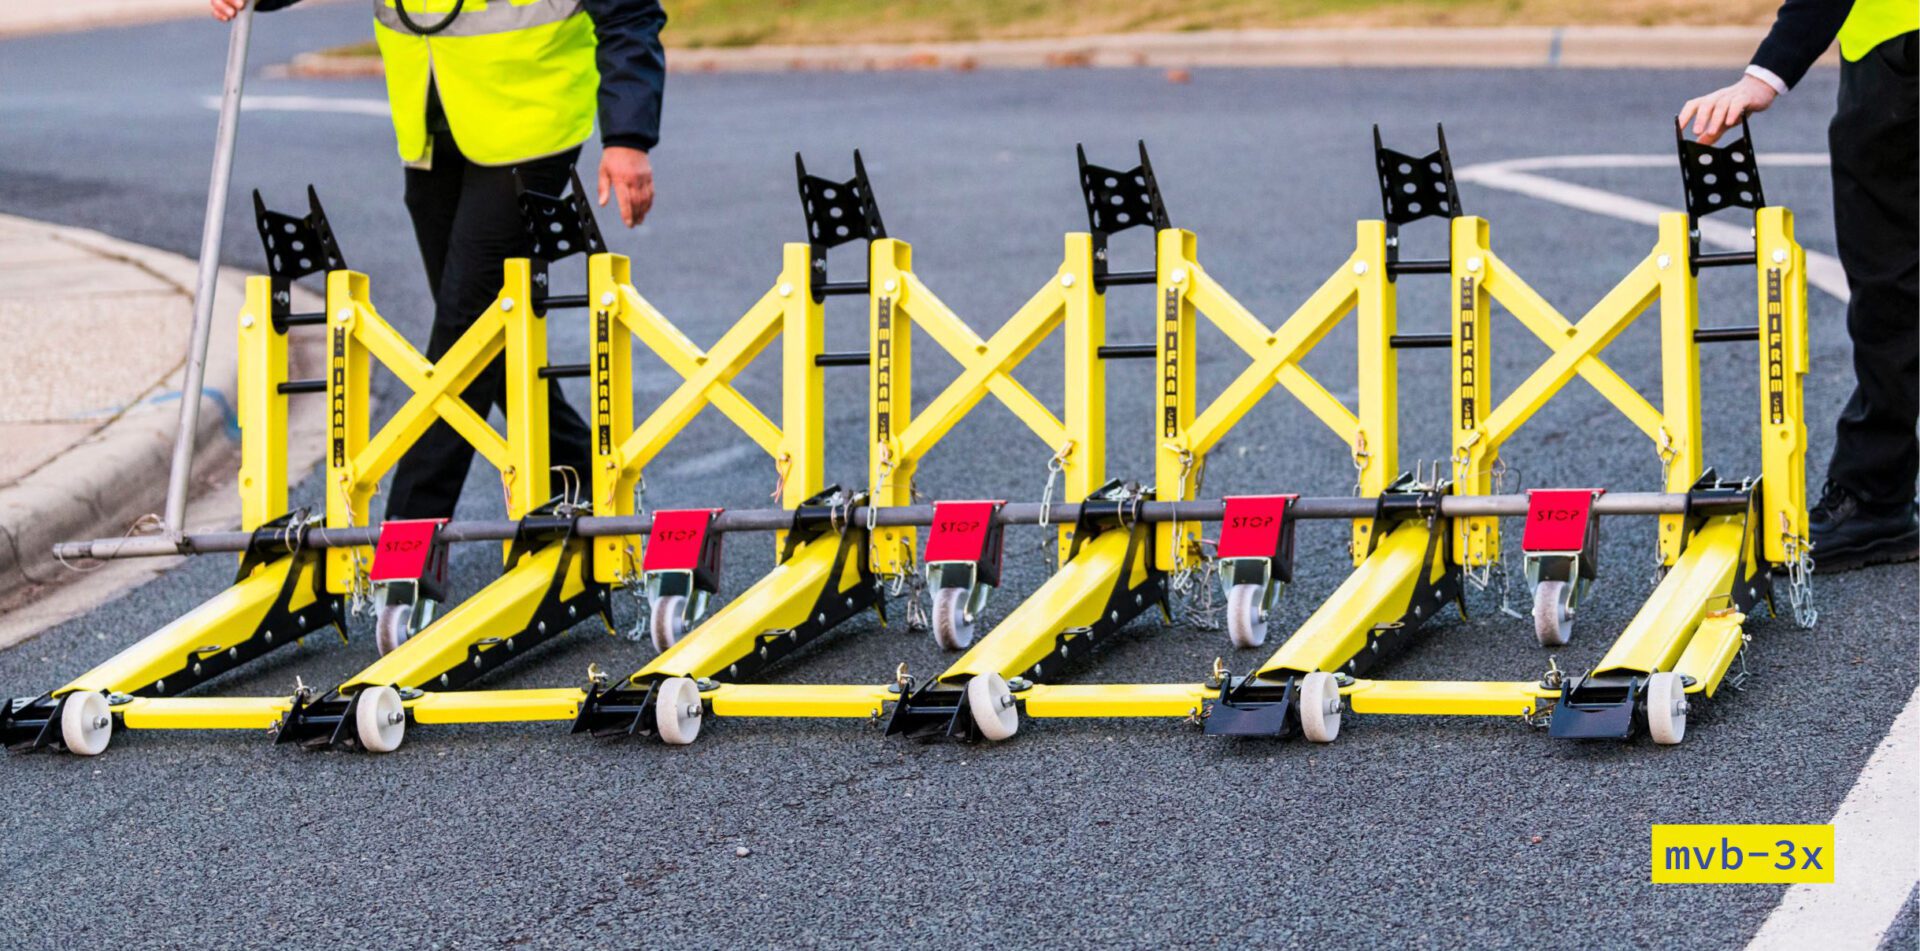 Modular Vehicle Barriers anti-ramming solutions